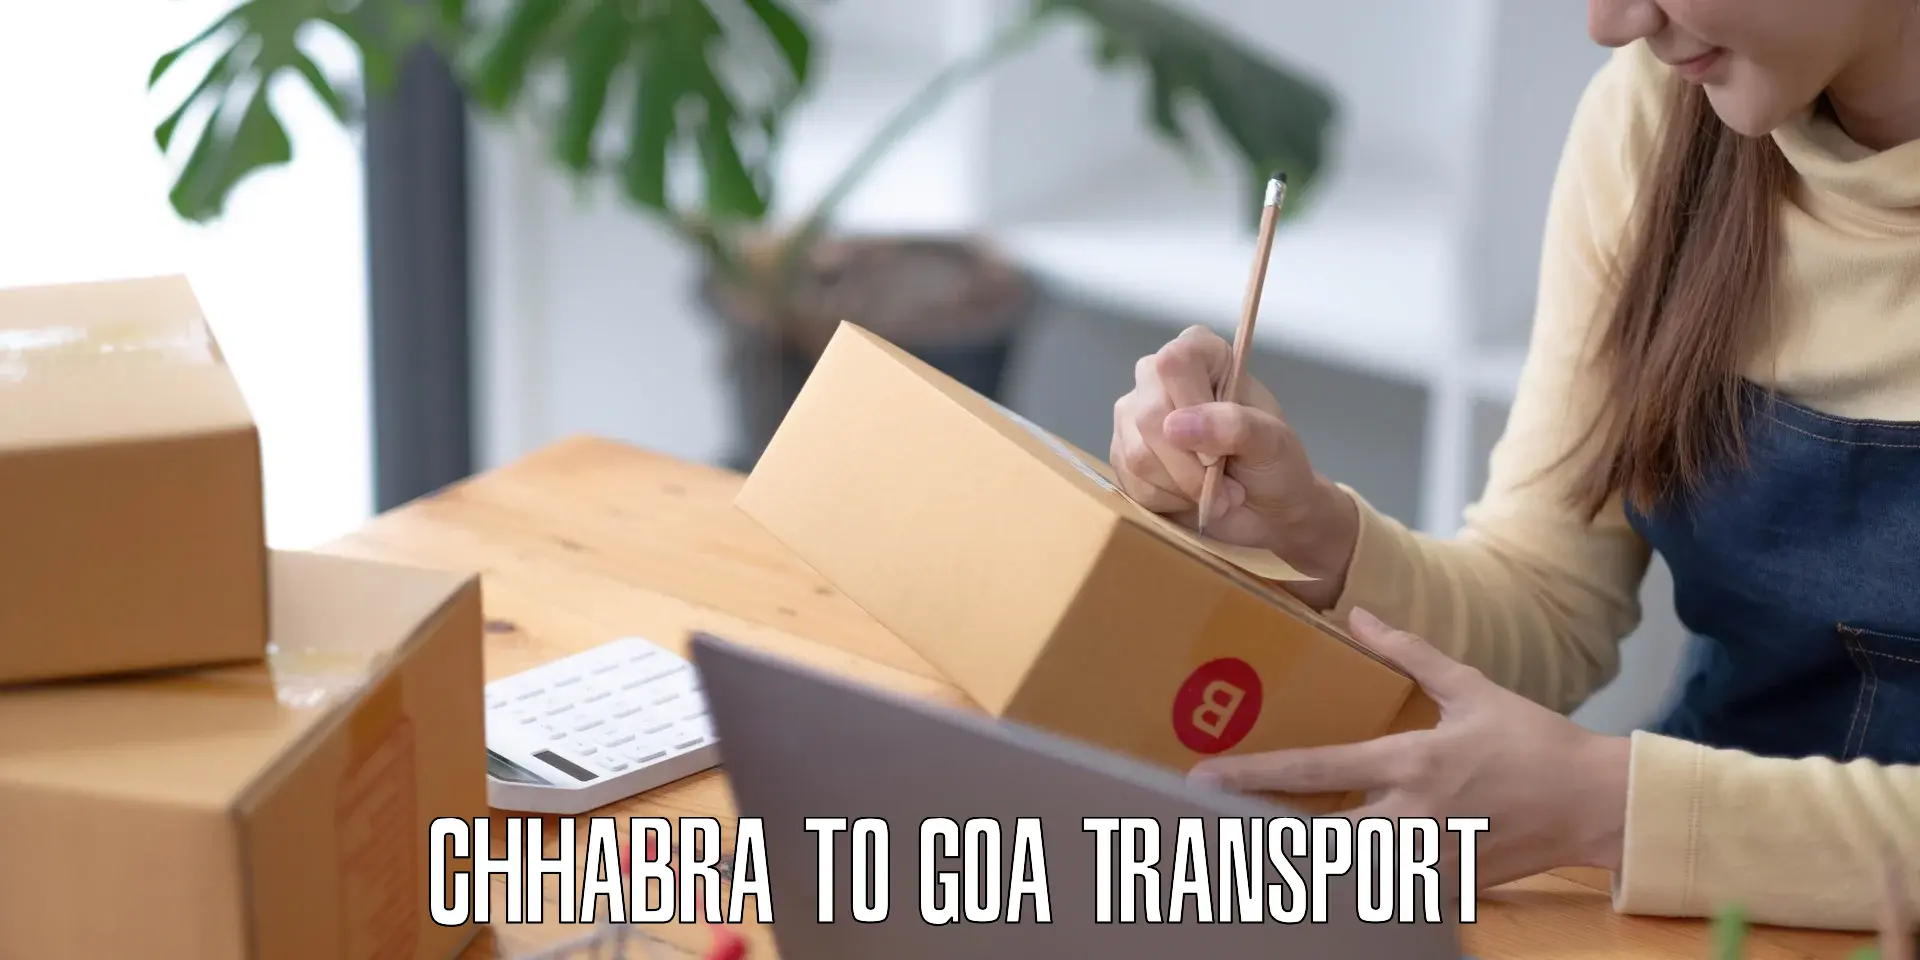 Road transport online services Chhabra to Goa